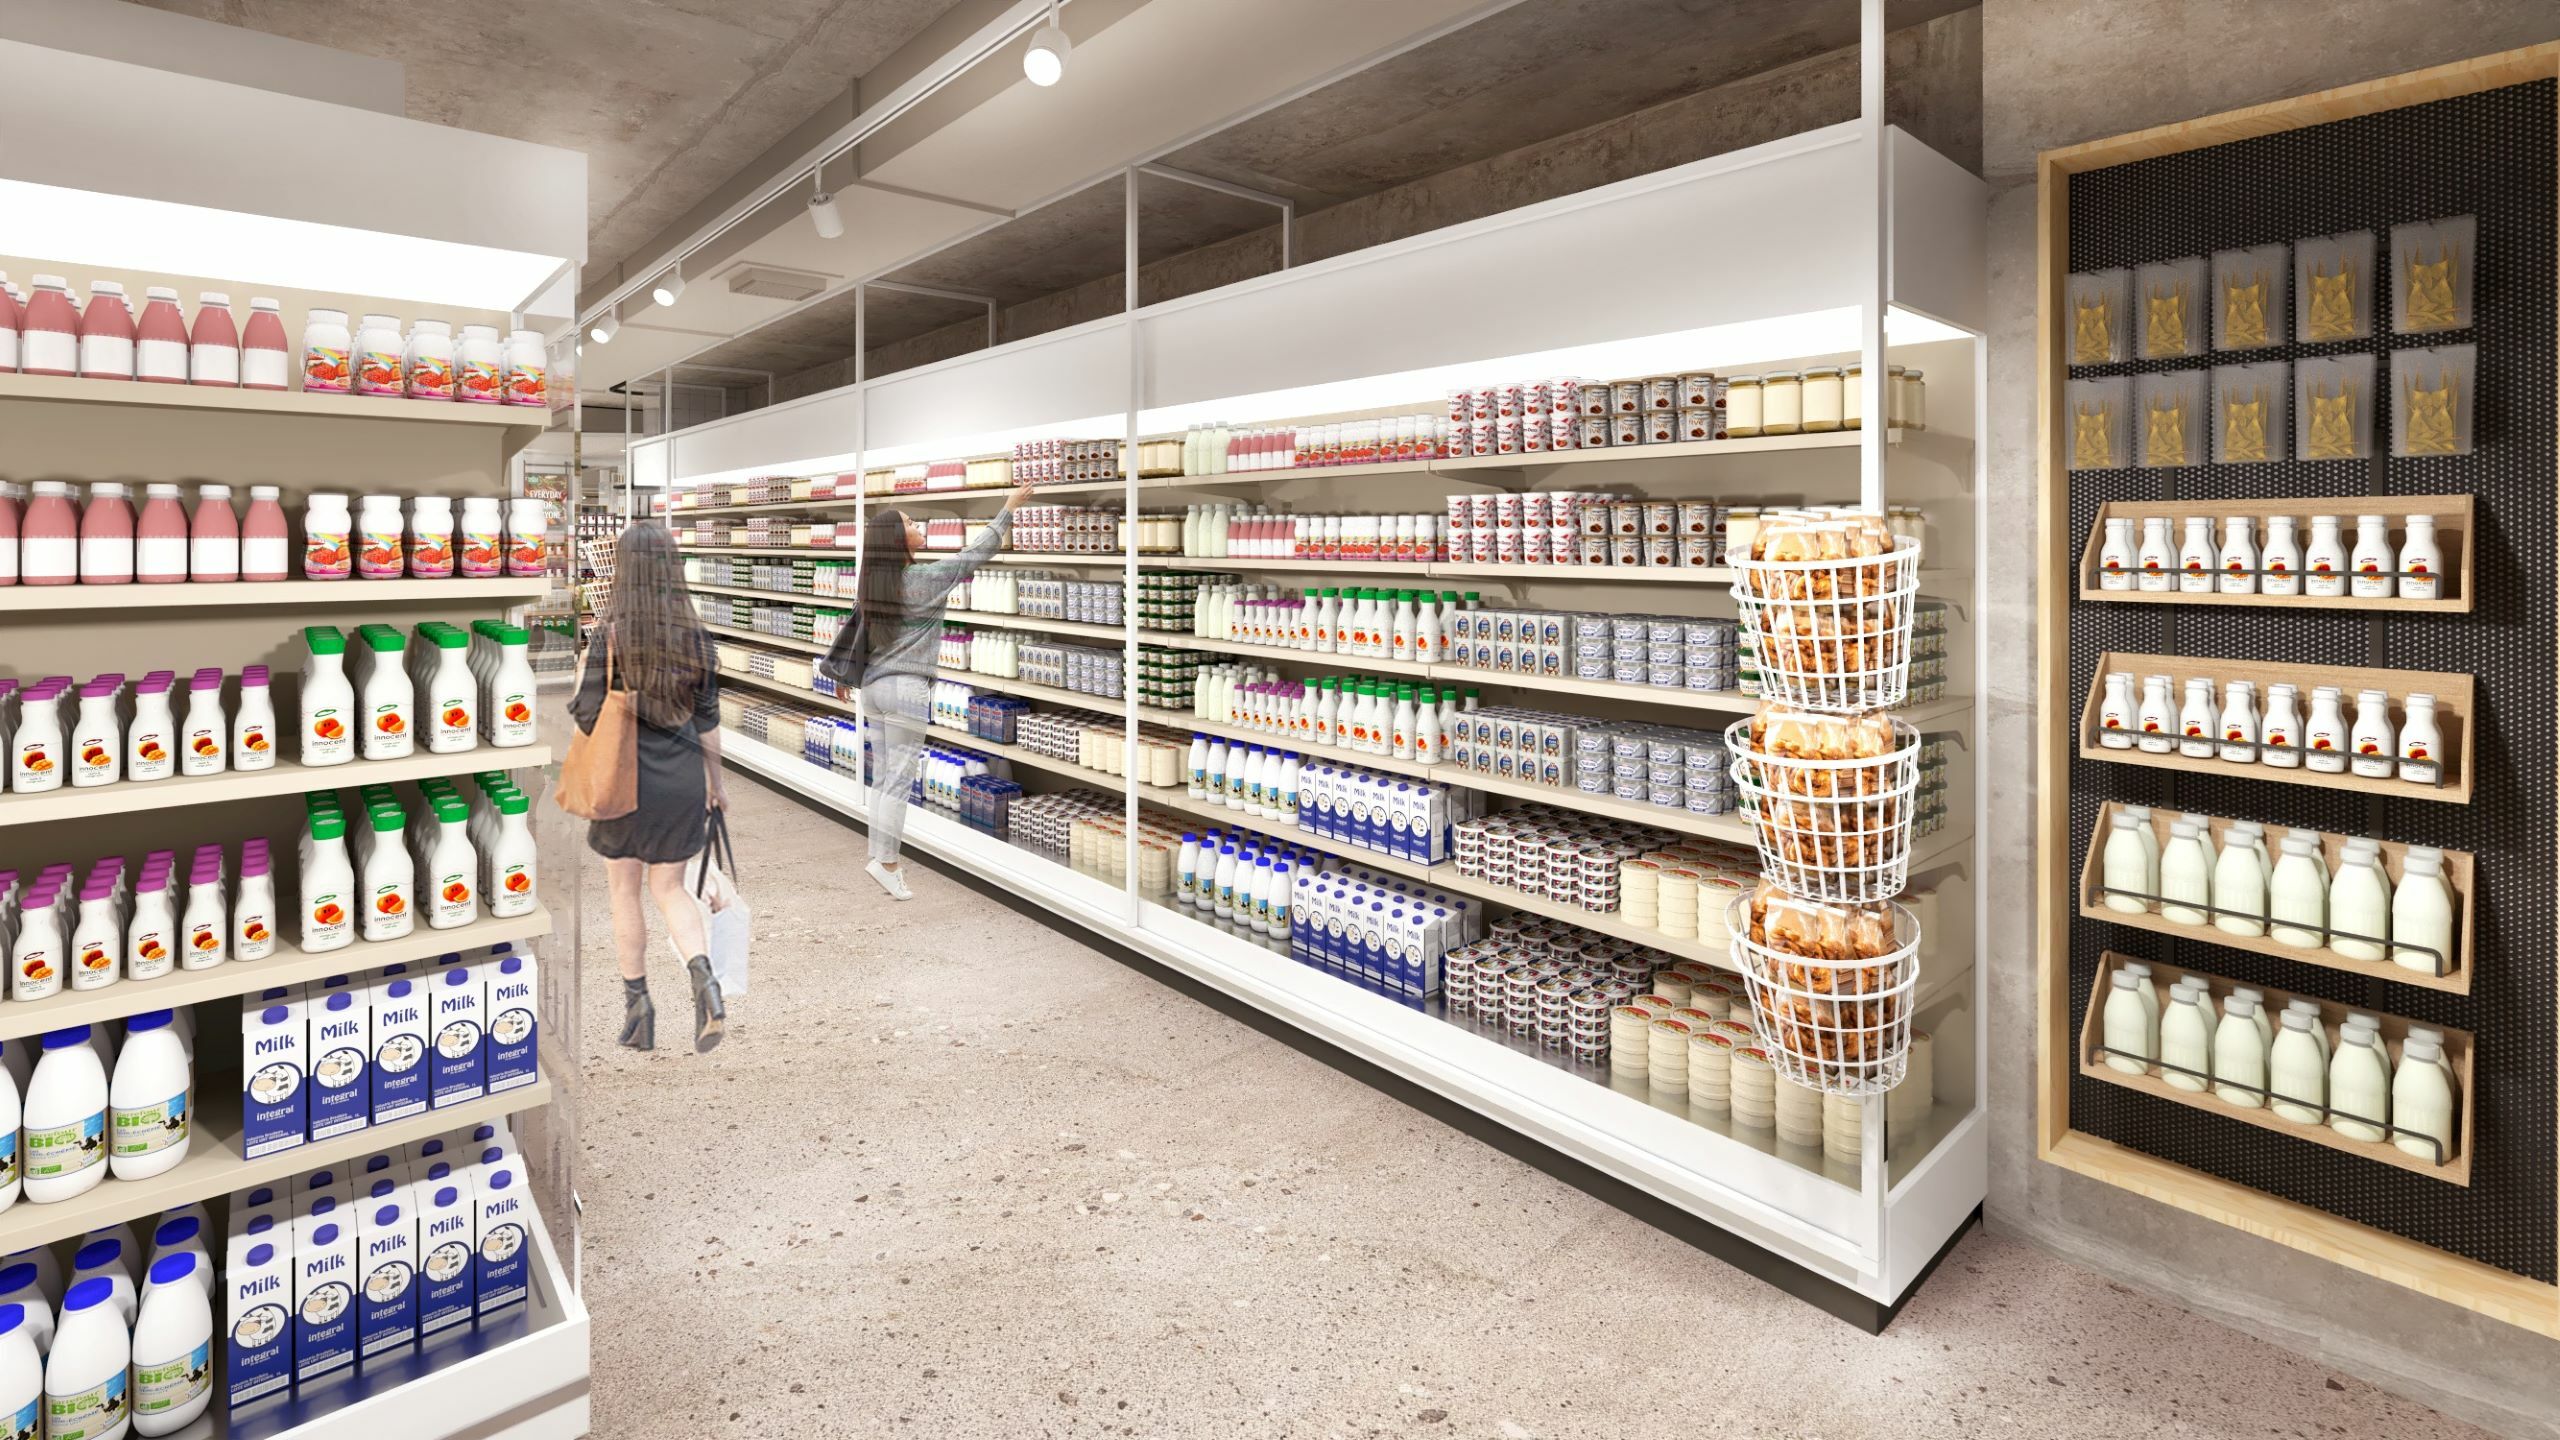 Whole Foods is opening a smaller convenience-like market in NYC